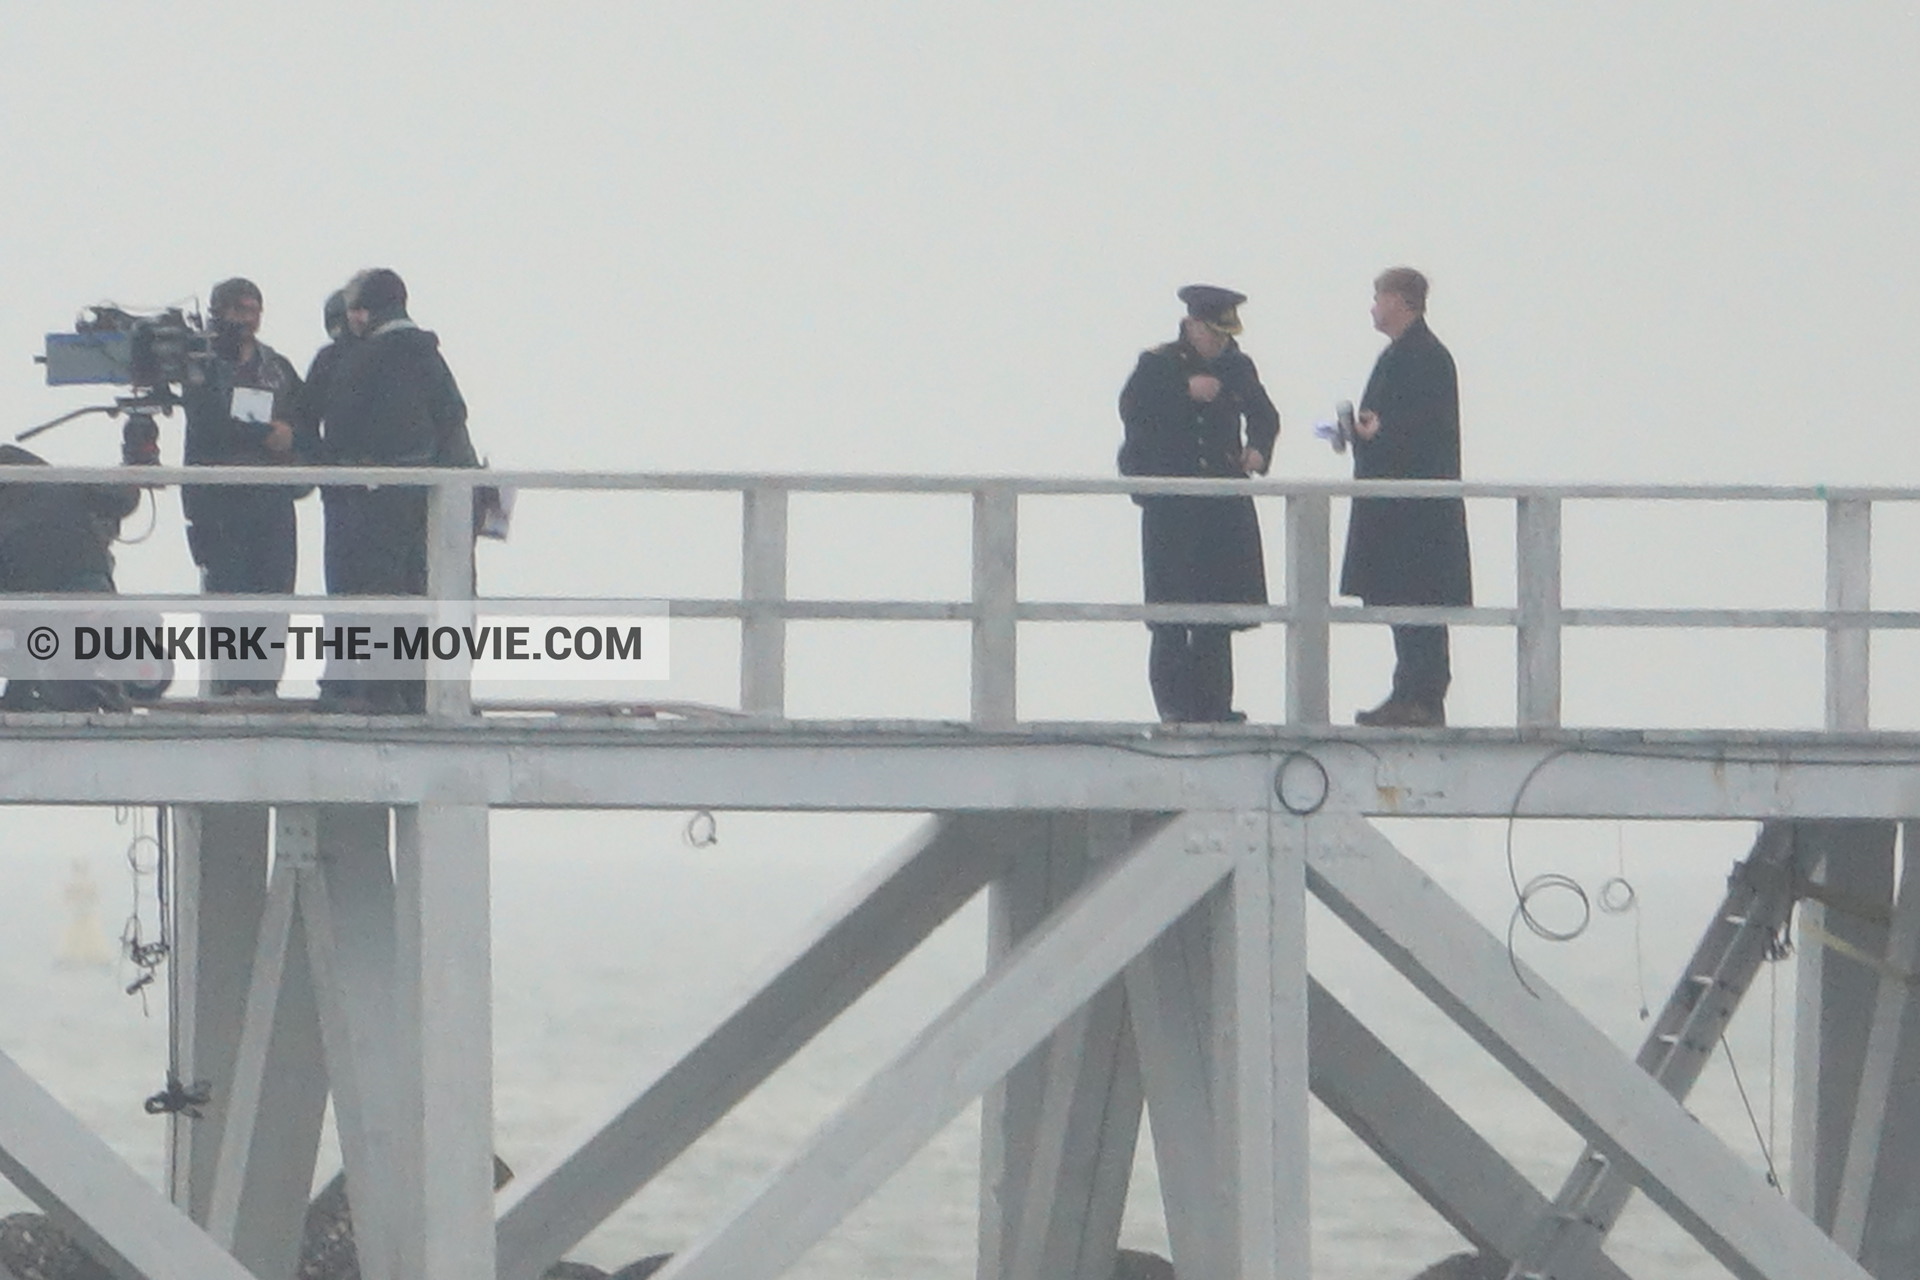 Picture with IMAX camera, EST pier, Kenneth Branagh, Christopher Nolan, technical team, Nilo Otero,  from behind the scene of the Dunkirk movie by Nolan